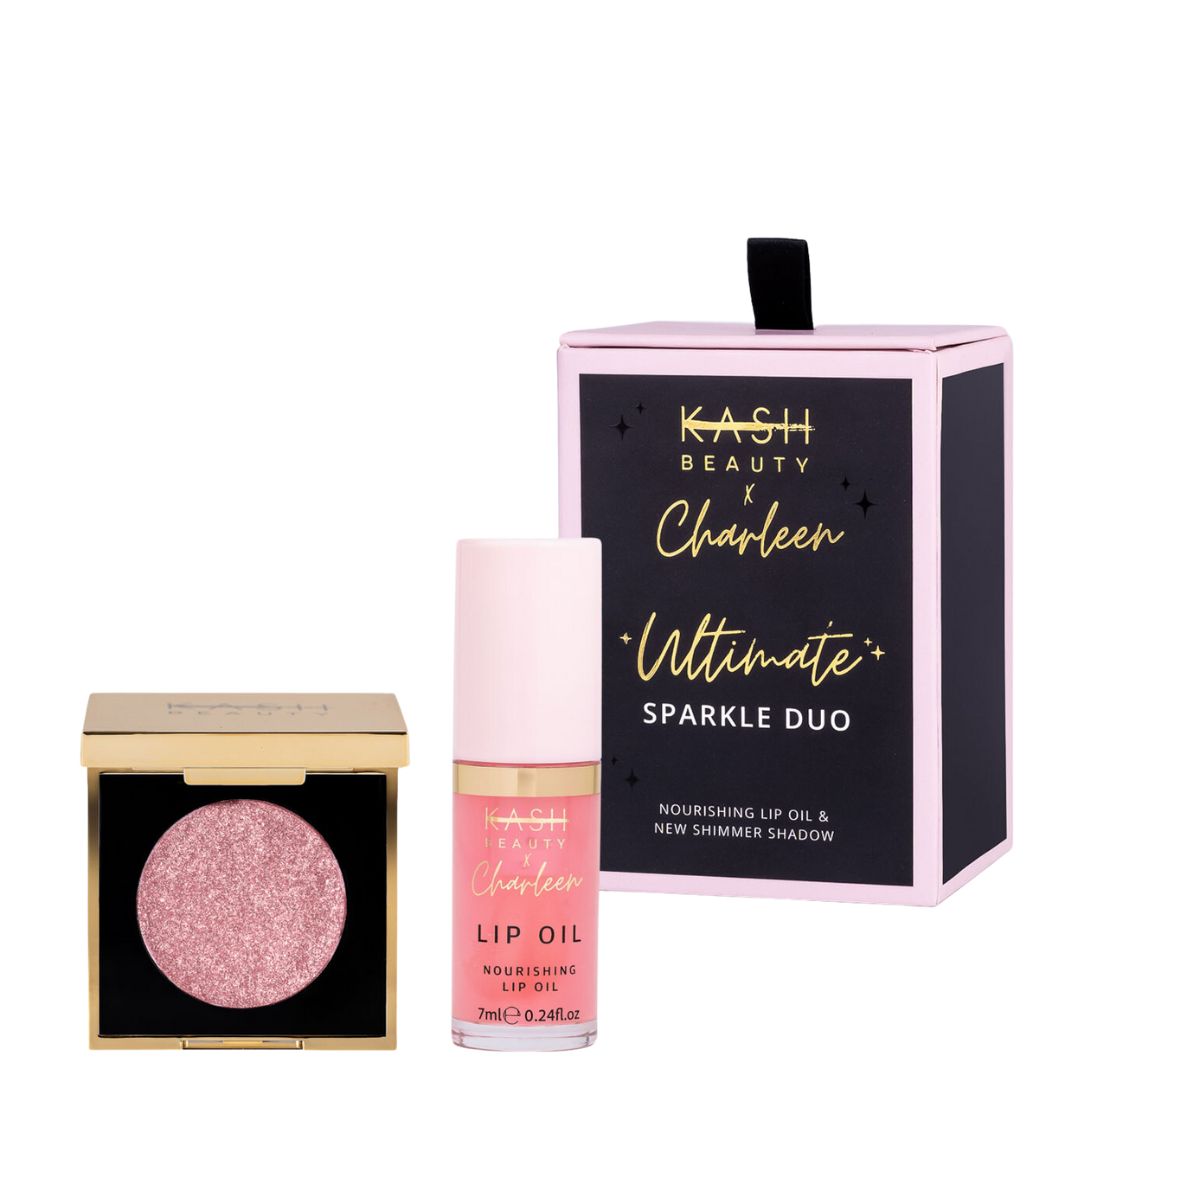 Kash Beauty Charleen - Ultimate Sparkle Duo